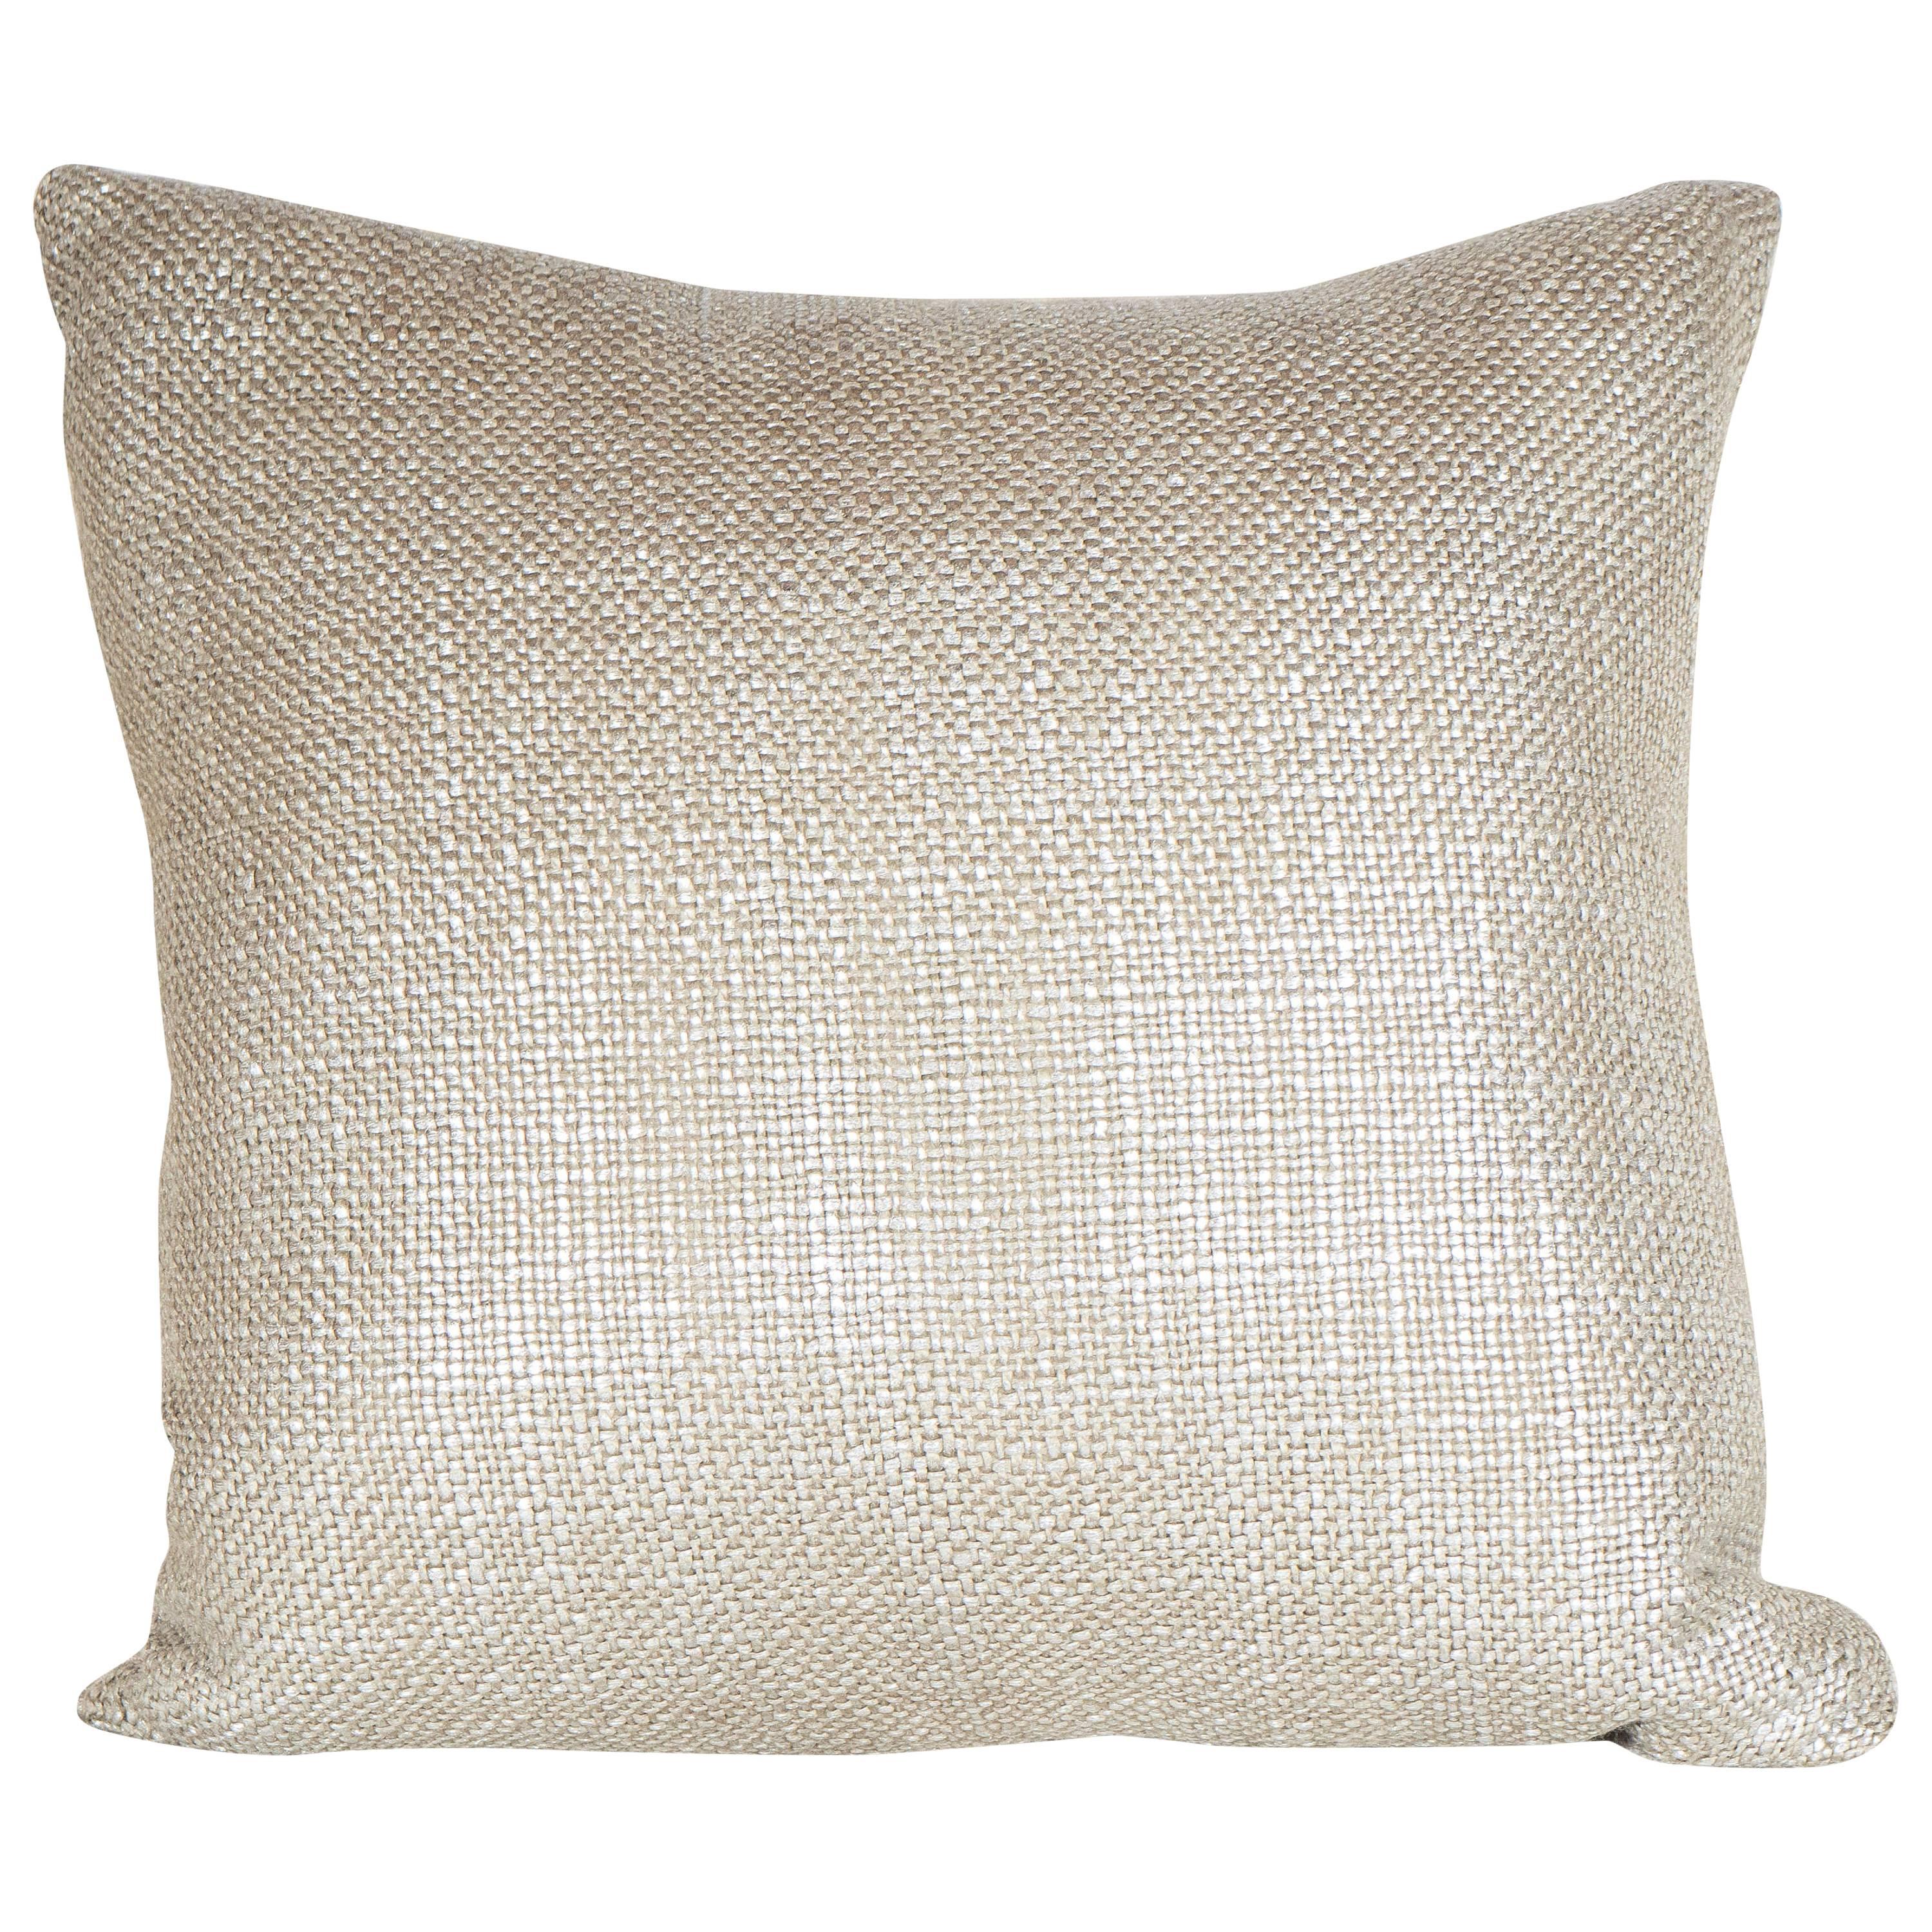 Custom Textured Woven Metallic Platinum Pillow with Linen Backing For Sale